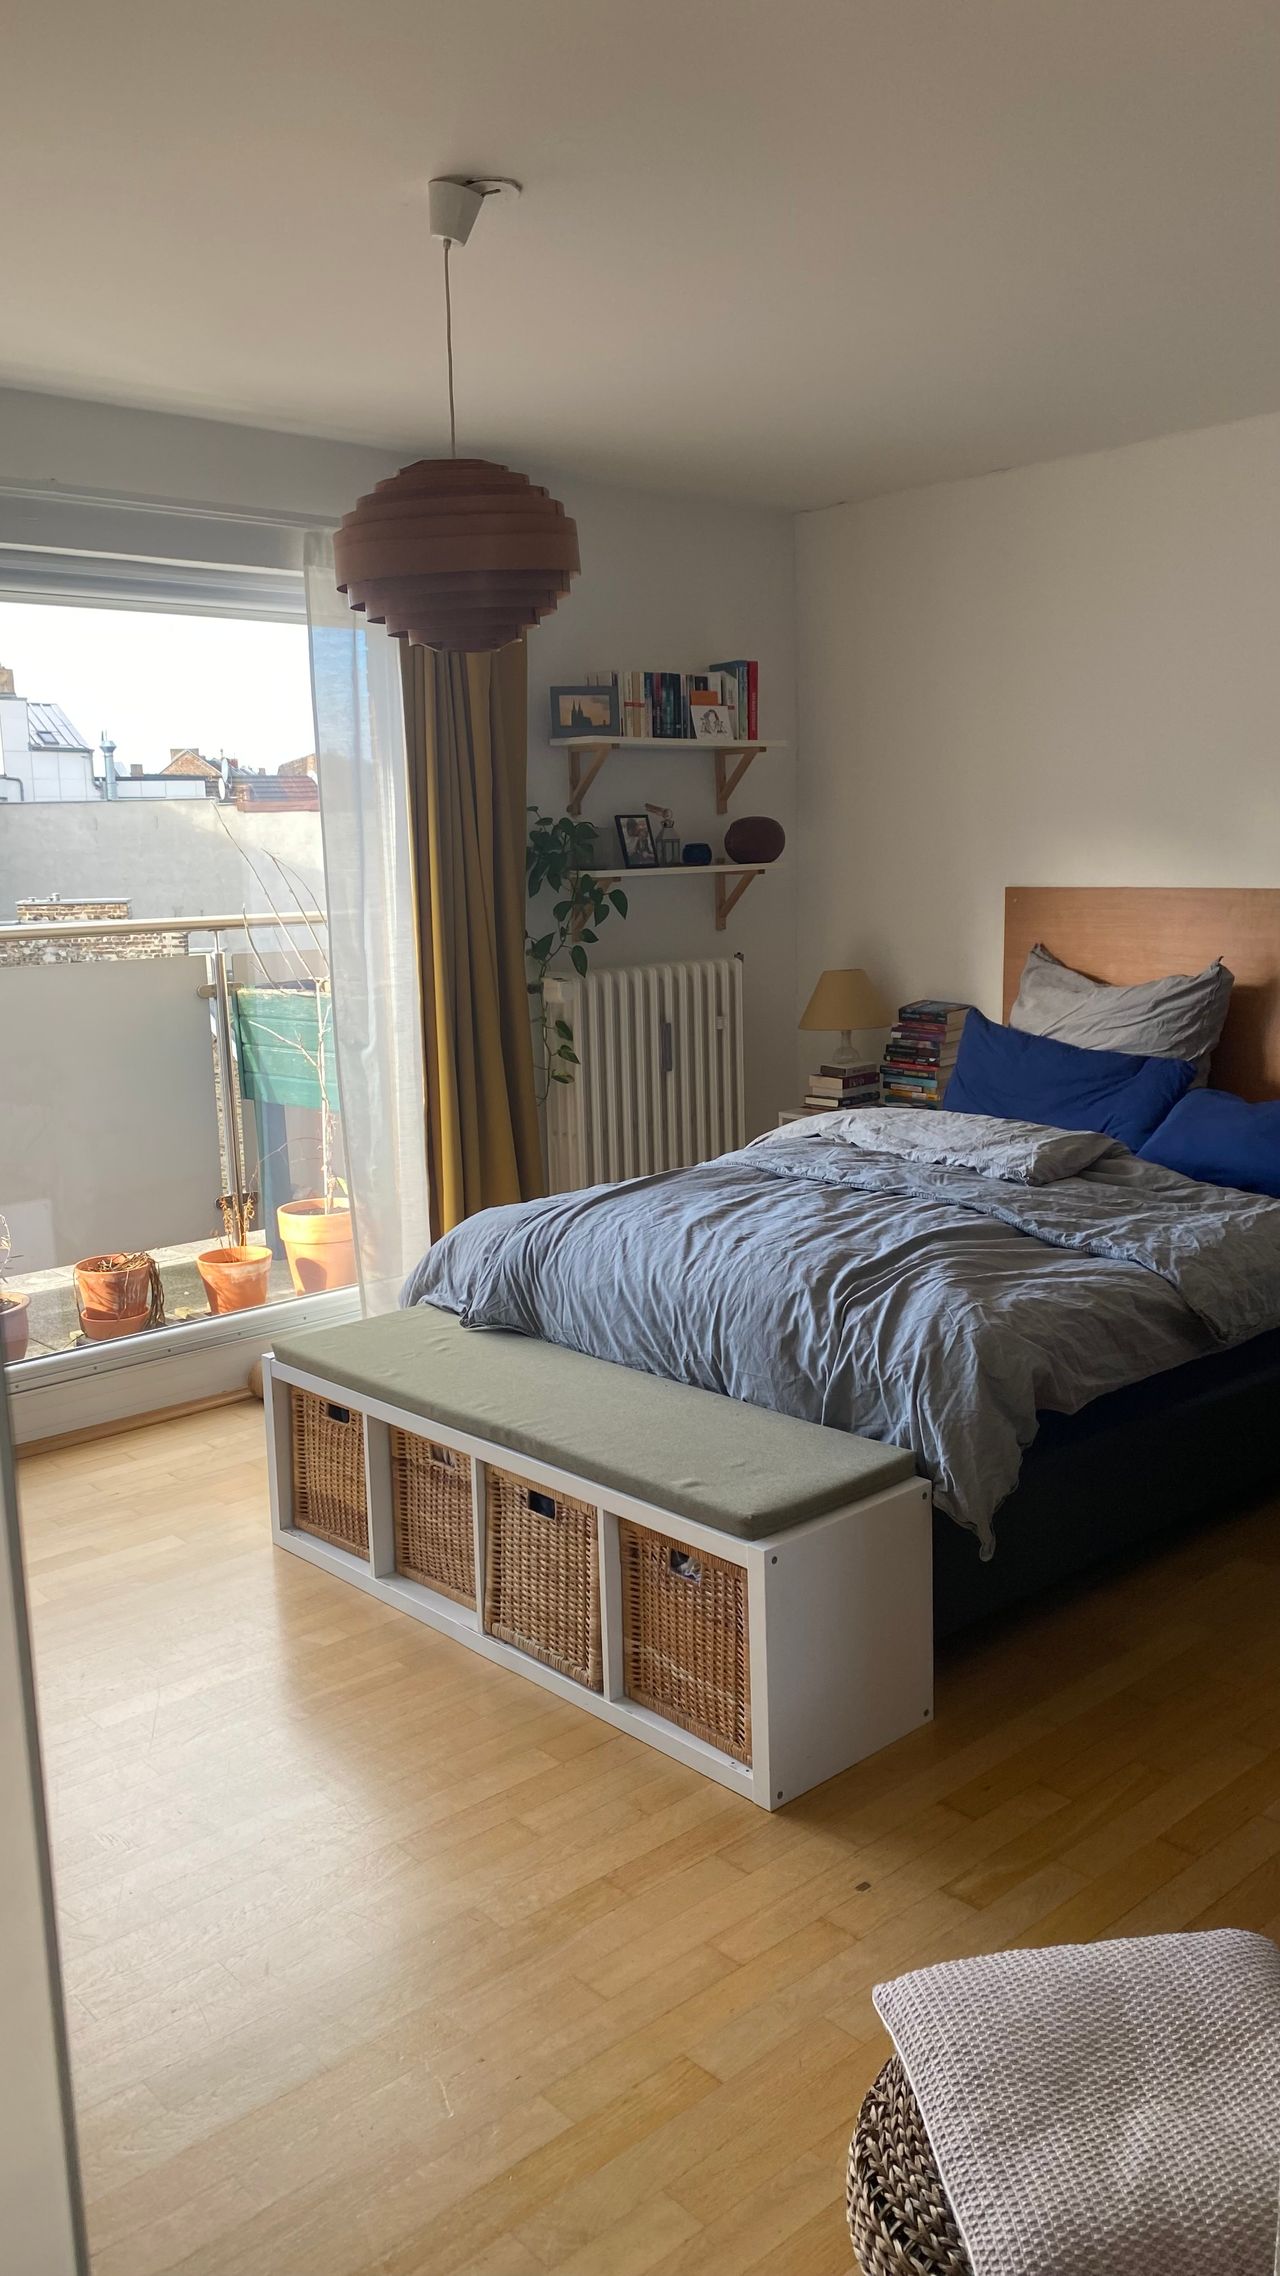 Cozy, quiet apartment in a perfect location in Cologne's Südstadt district